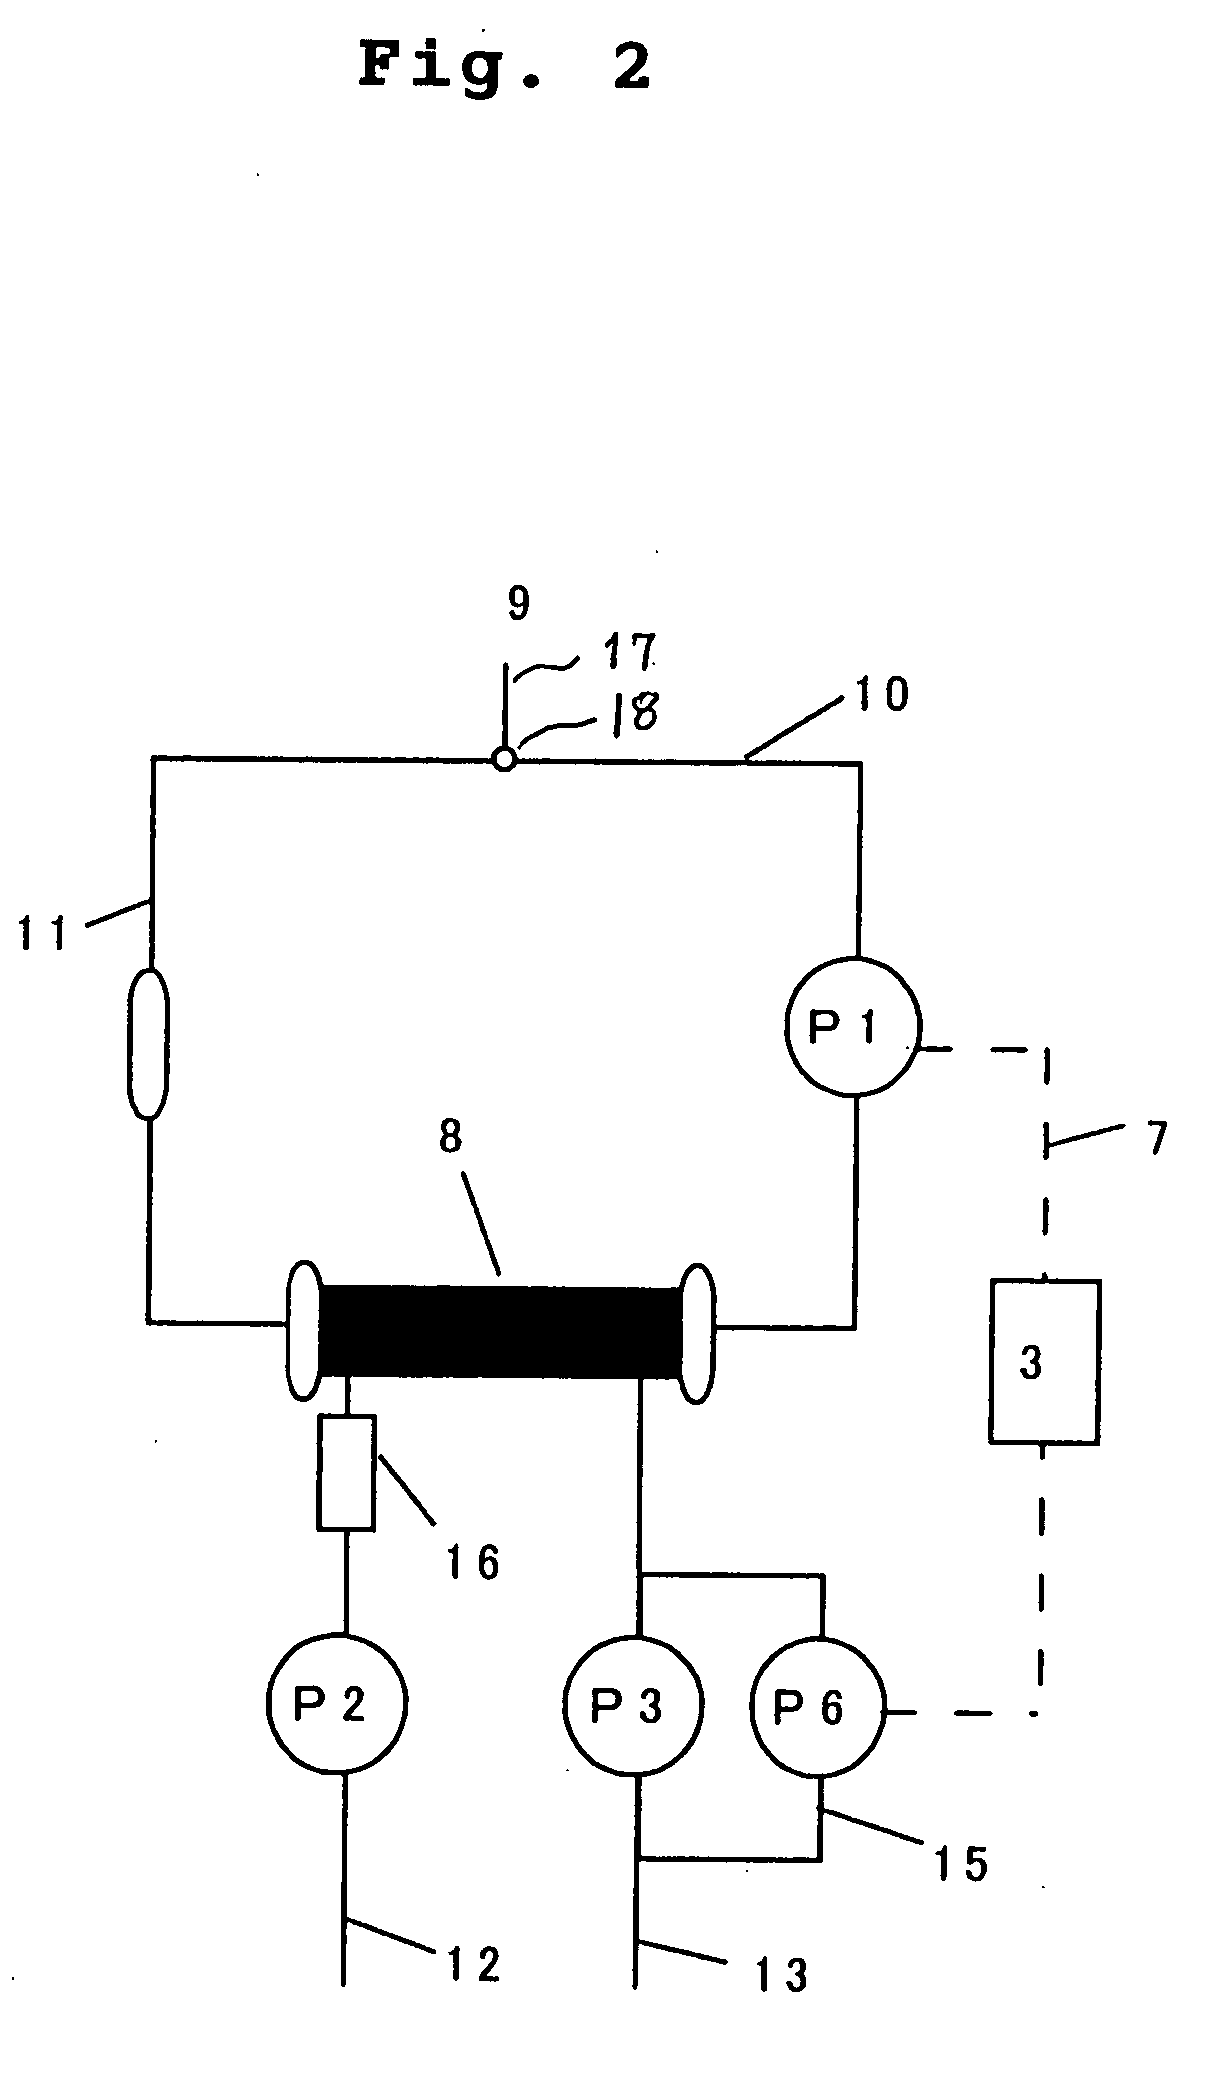 Apparatus for blood dialysis and filtration